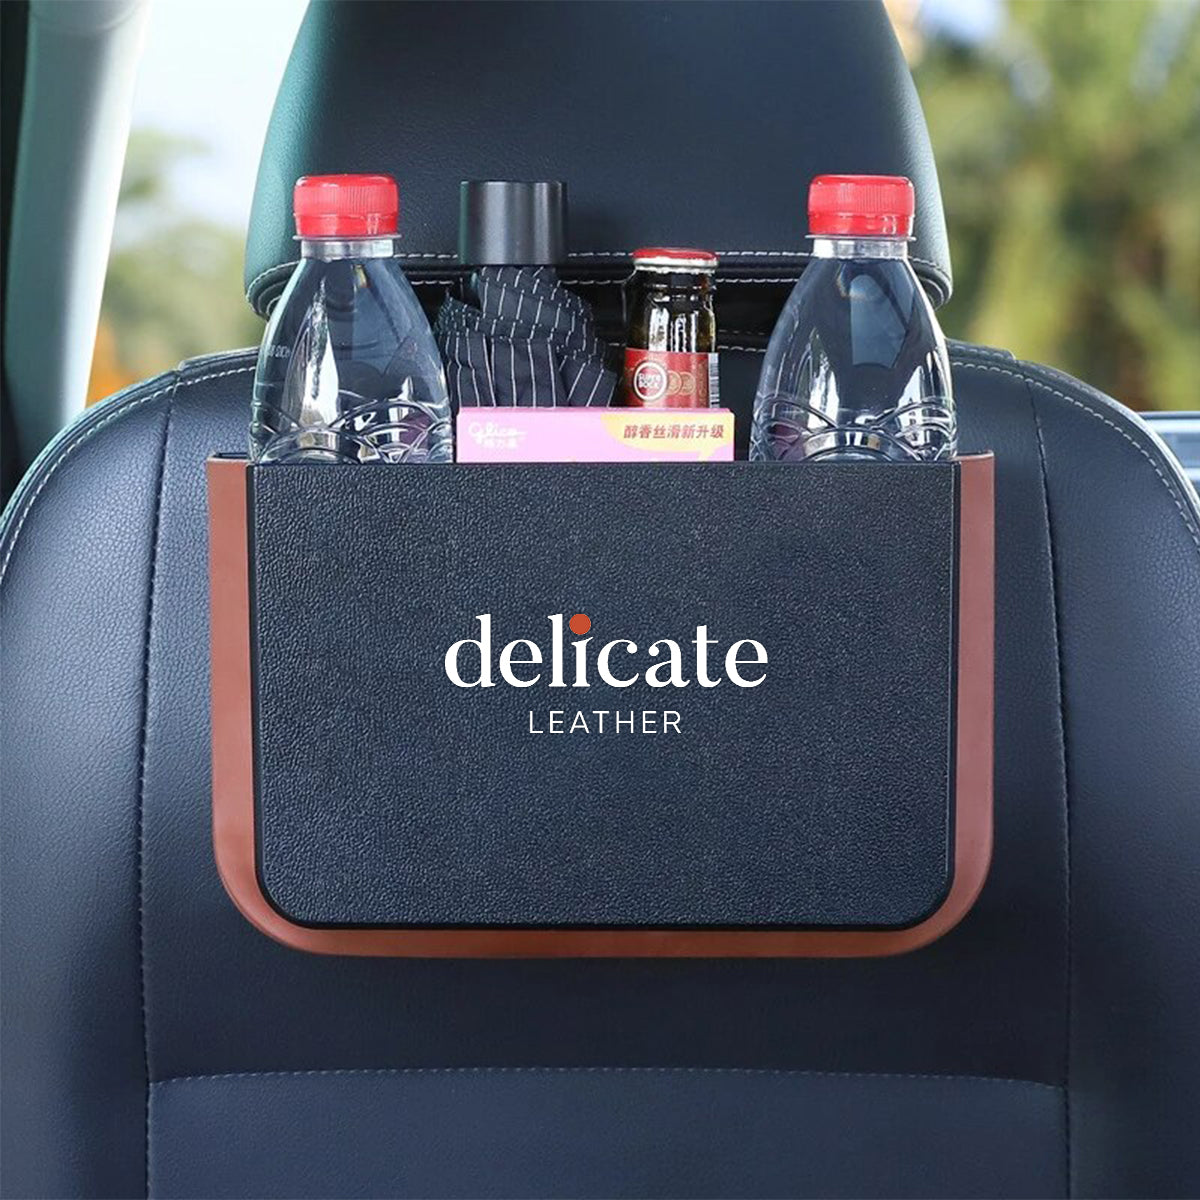 Delicate Leather Hanging Waterproof Car Trash can-Foldable, Custom For Your Cars, Waterproof, and Equipped with Cup Holders and Trays. Multi-Purpose, Car Accessories PE11992 - Delicate Leather